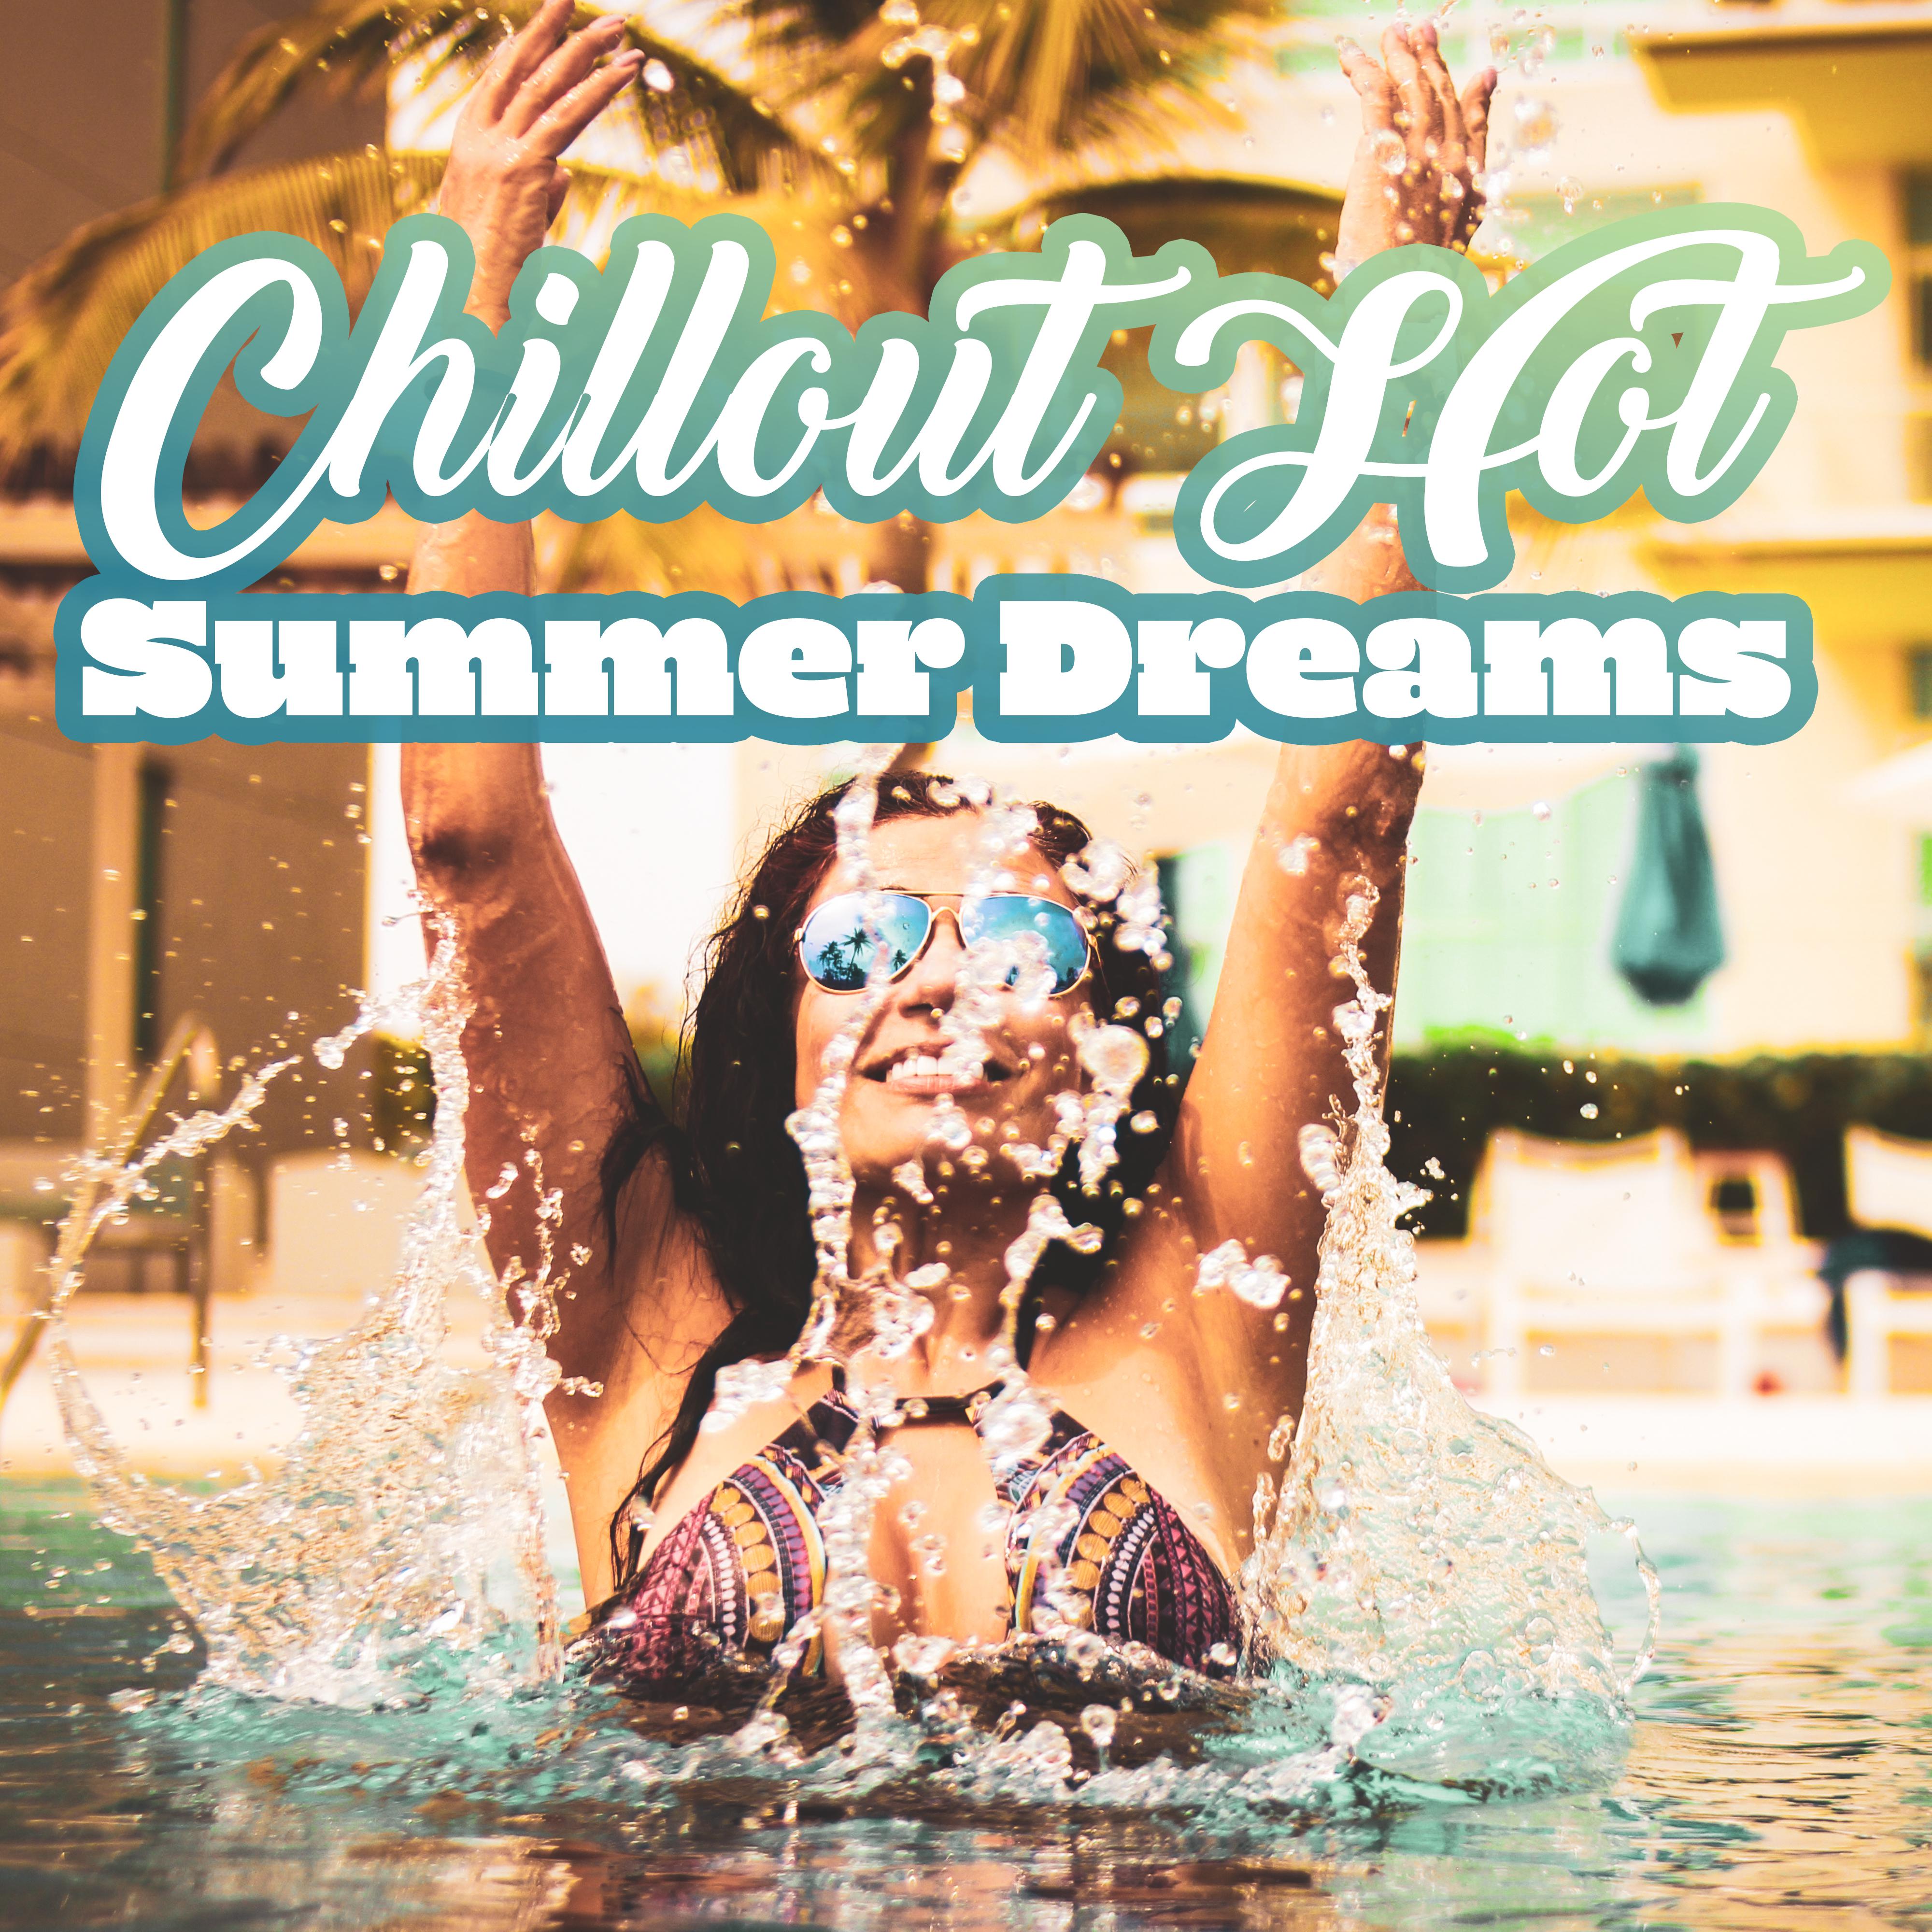 Chillout Hot Summer Dreams: Compilation of Best Holiday Relaxing Chill Out 2019 Music, Perfect Time Spending with Love, Palma de Lounge